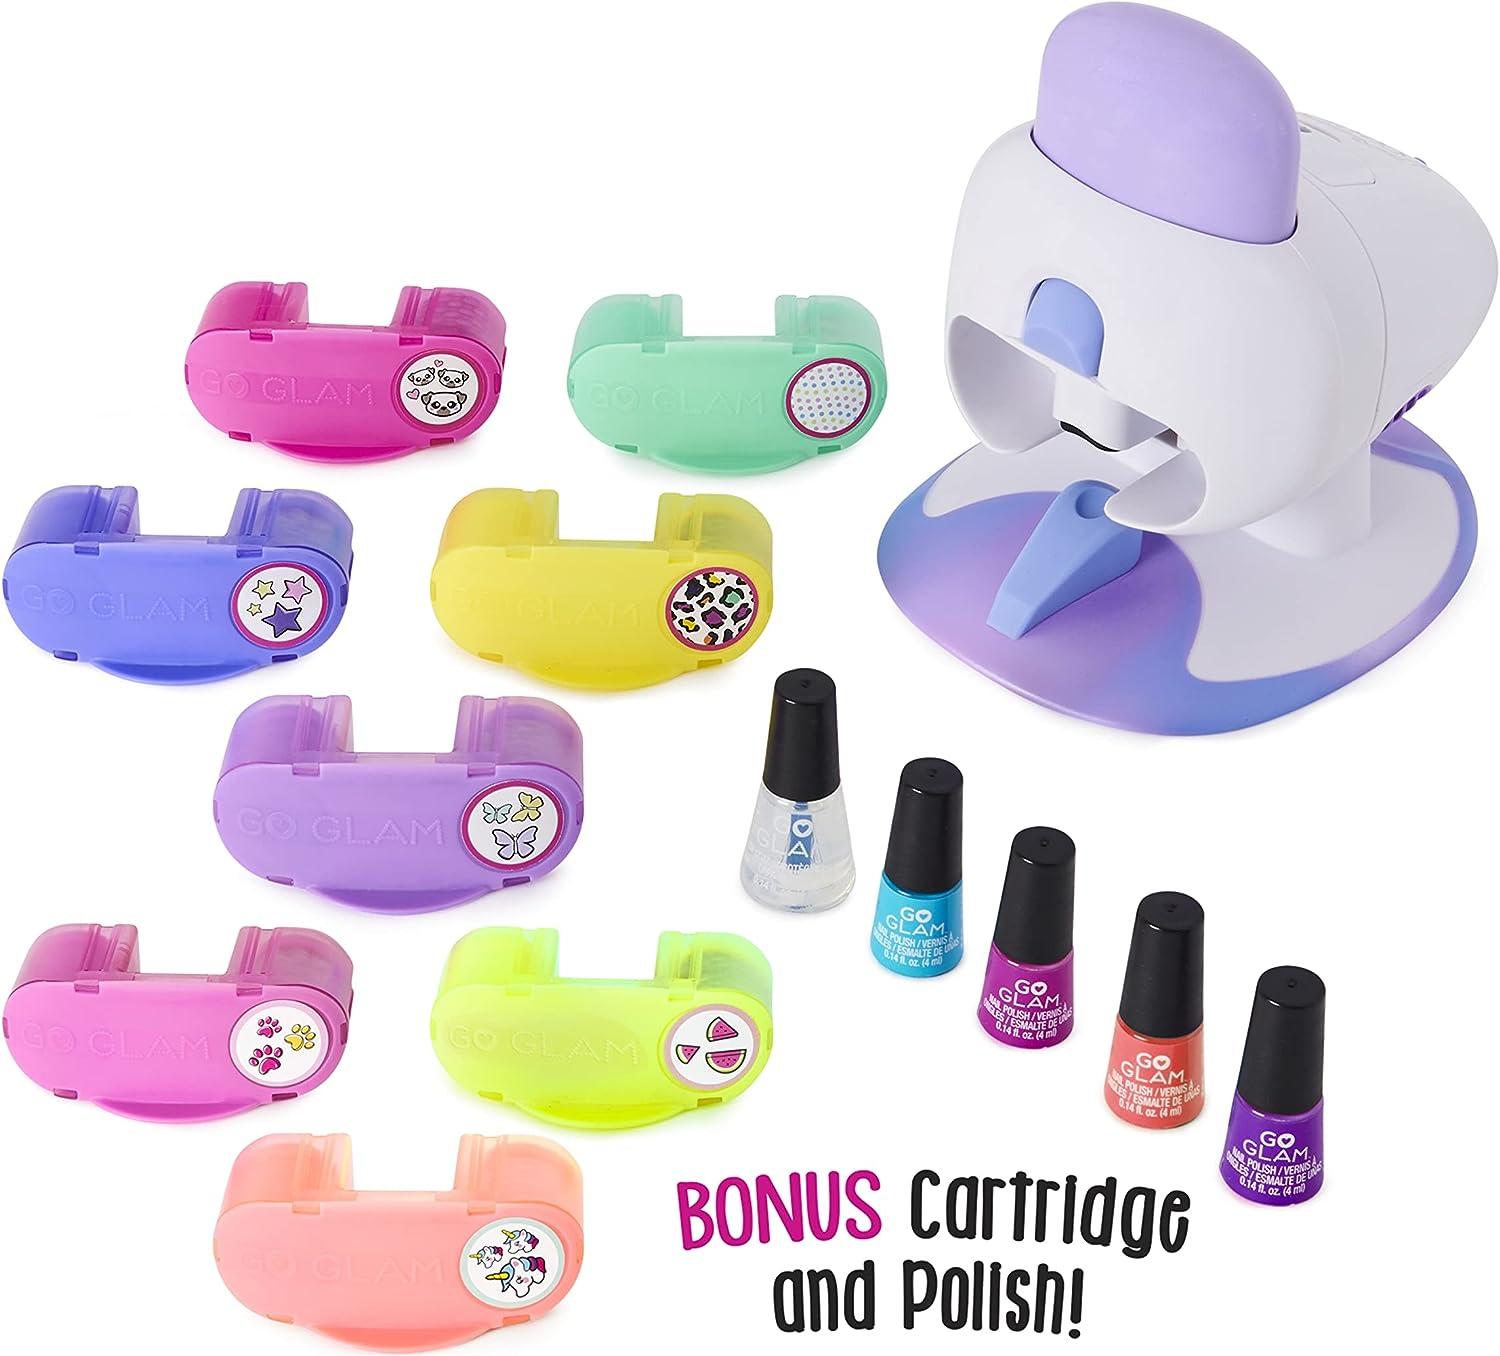 Cool Maker, GO GLAM Nail Stamper Salon for Manicures and Pedicures with 5  Patterns and Nail Dryer